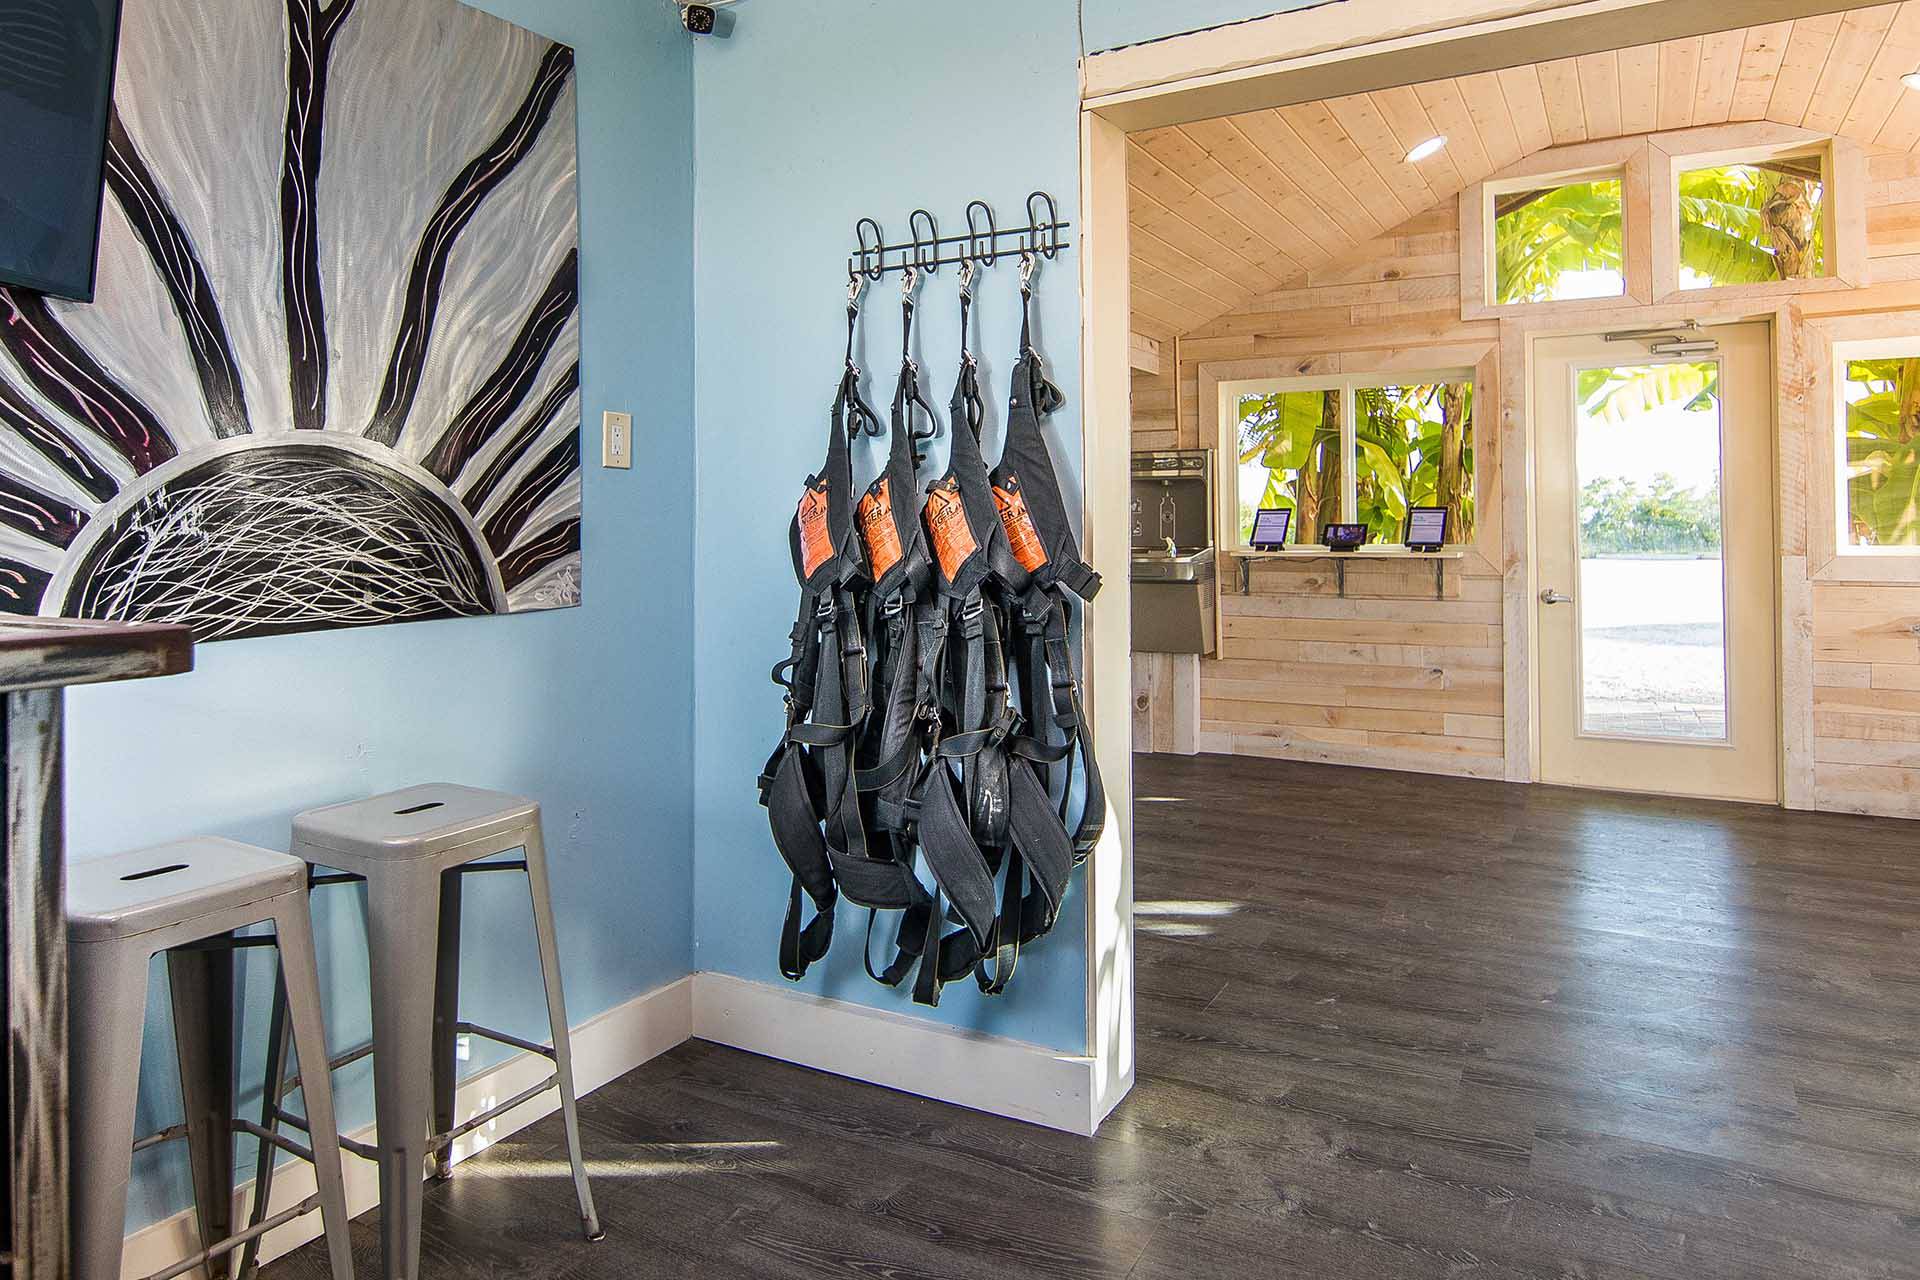 Inside view of Skydive Key West Facilities